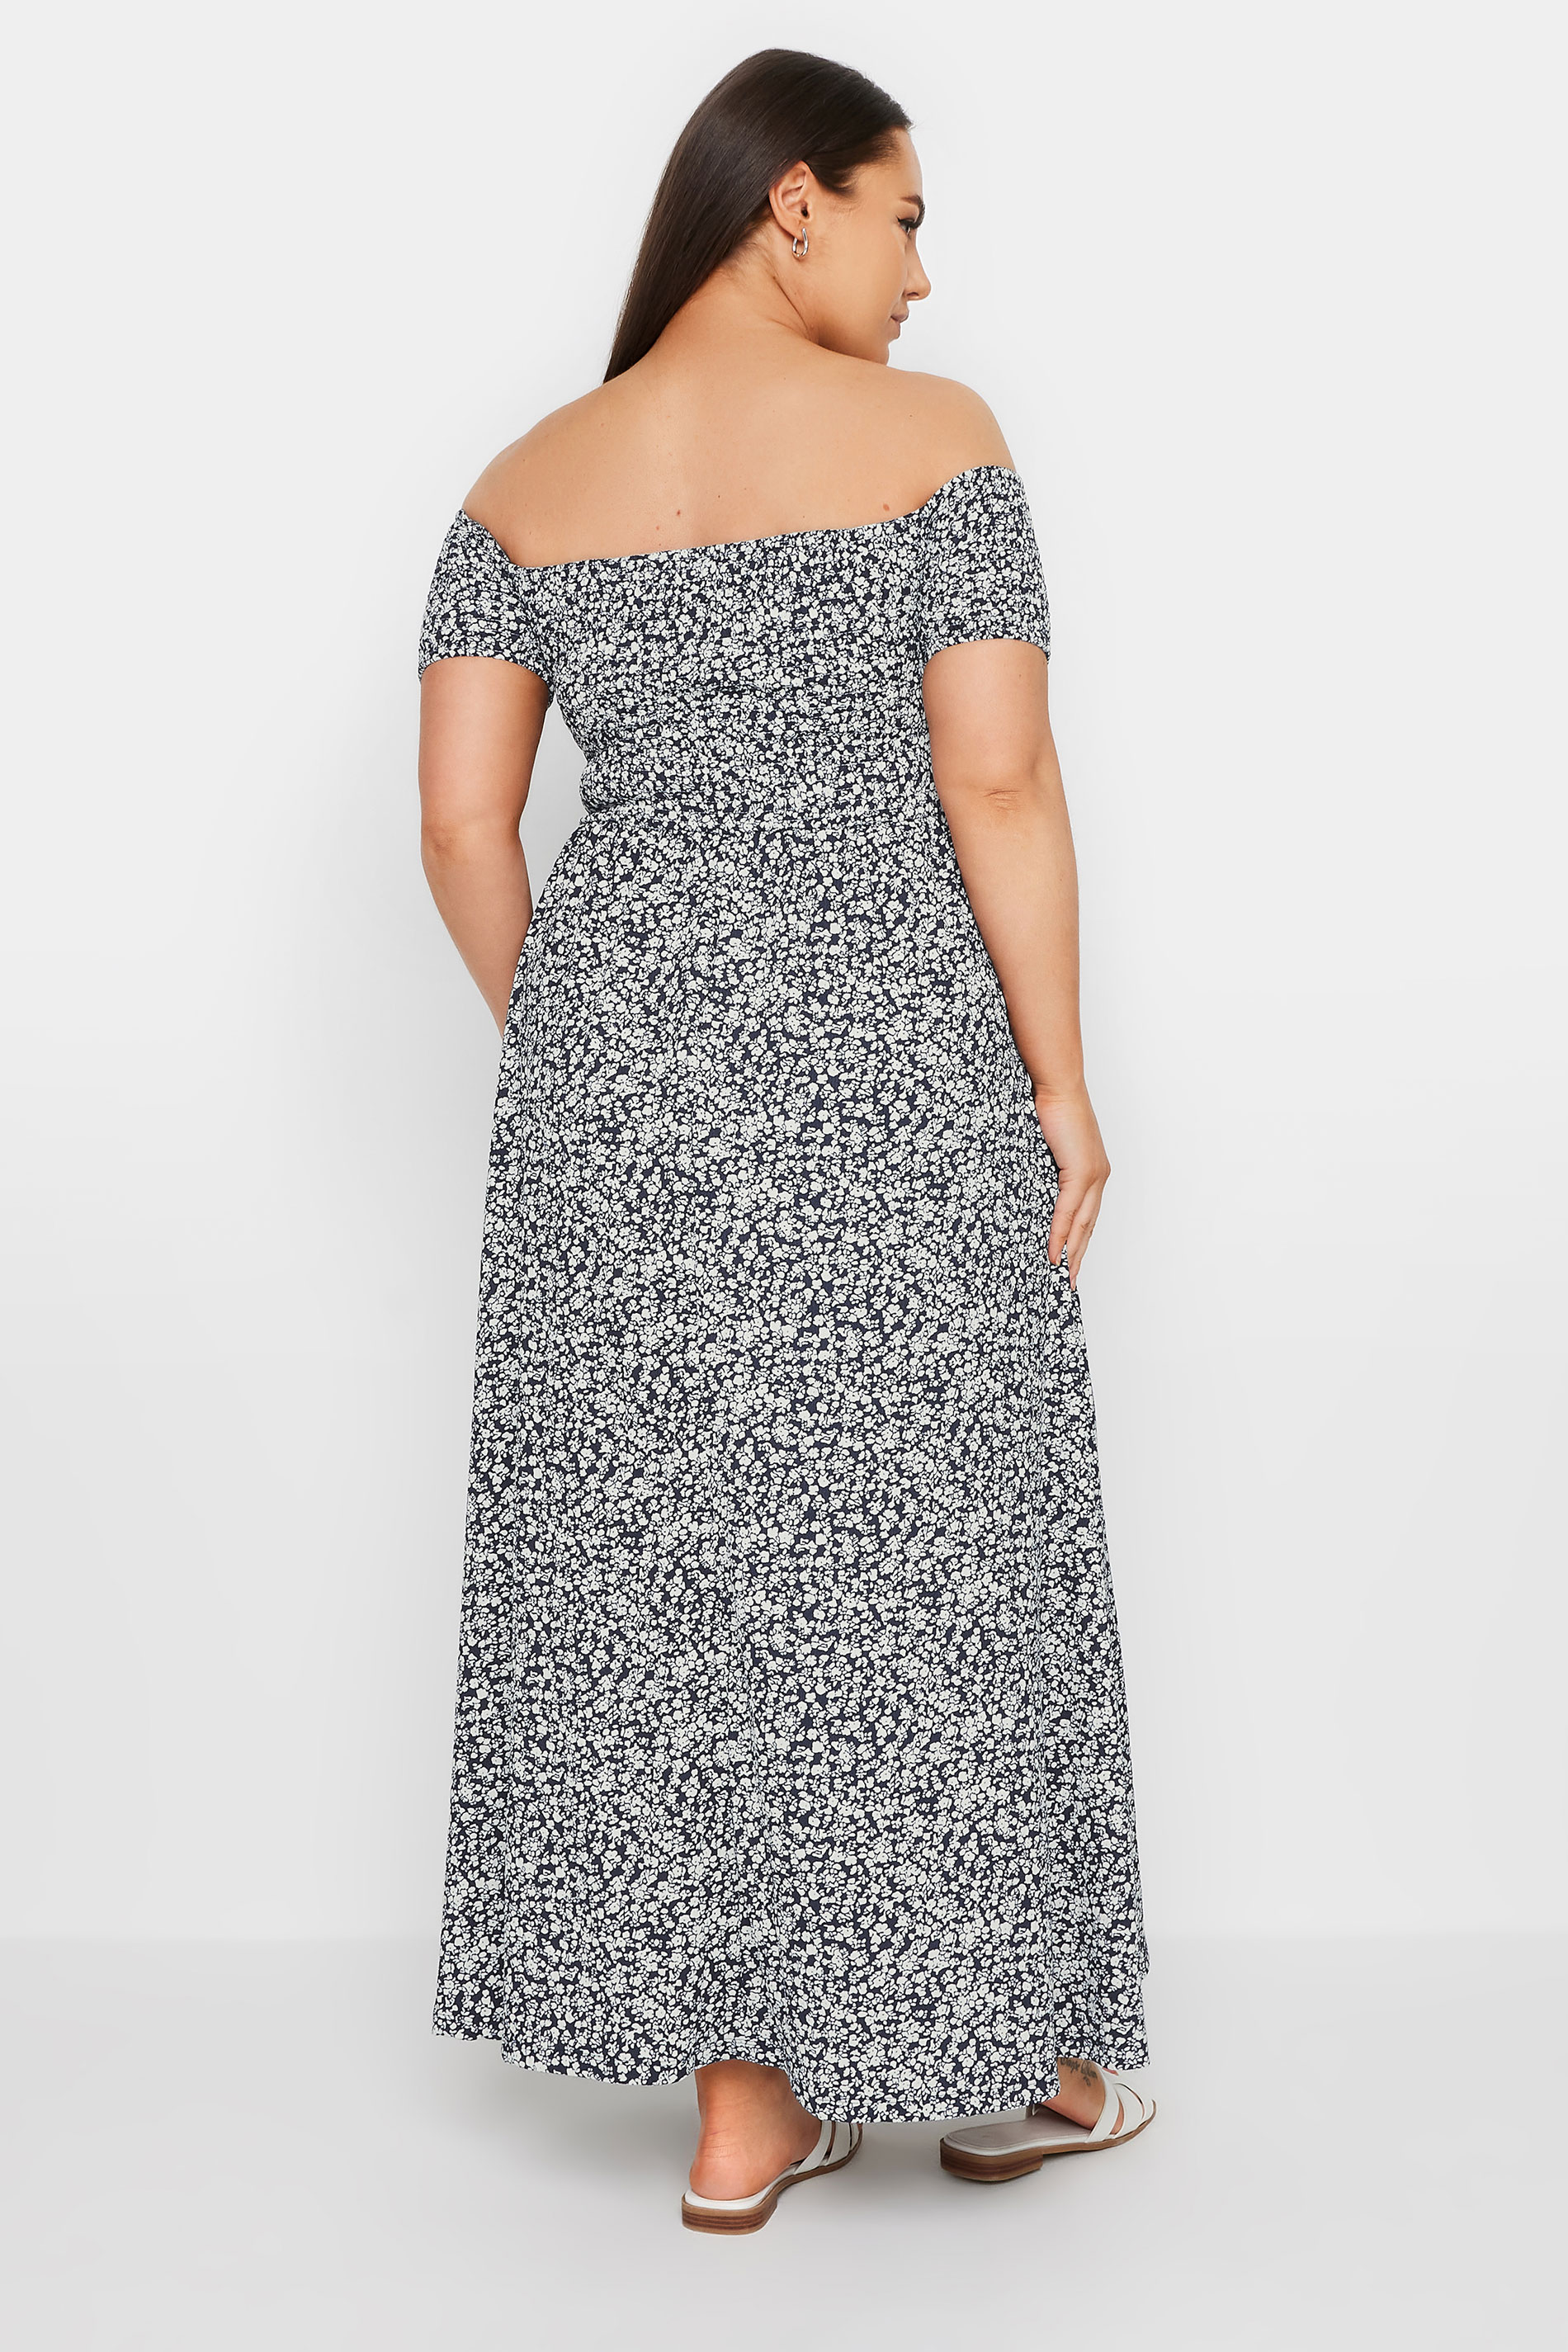 YOURS Plus Size Navy Blue Floral Print Bardot Midaxi Dress | Yours Clothing 3